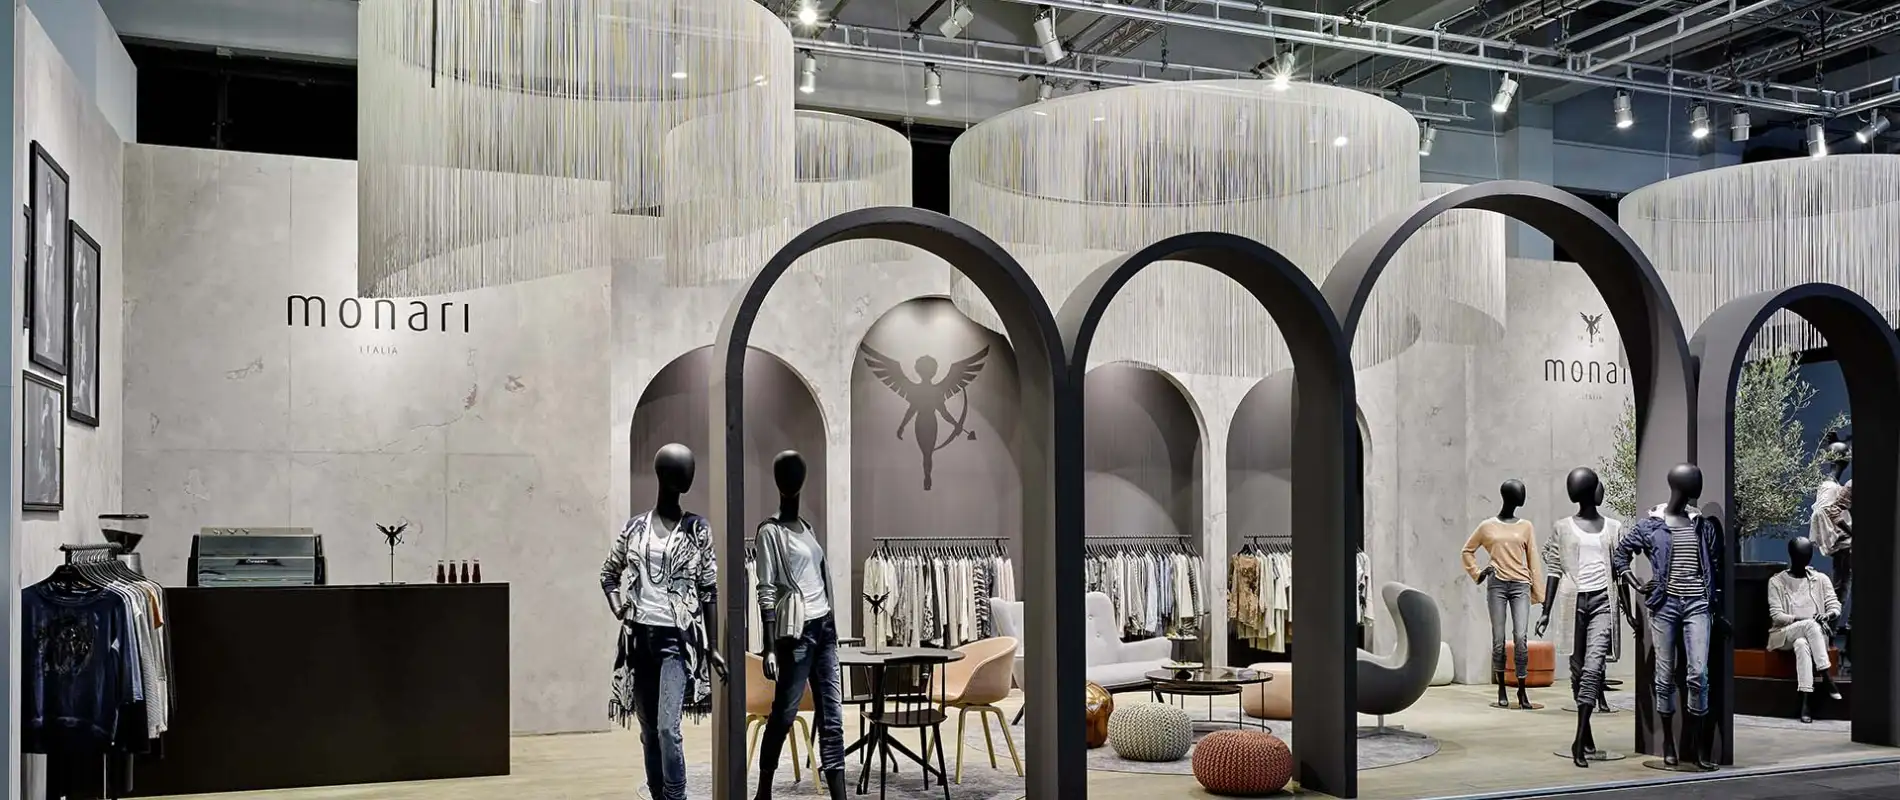 fair booth - concept and realisation - Monari Berlin - overview from outside - abstract arches